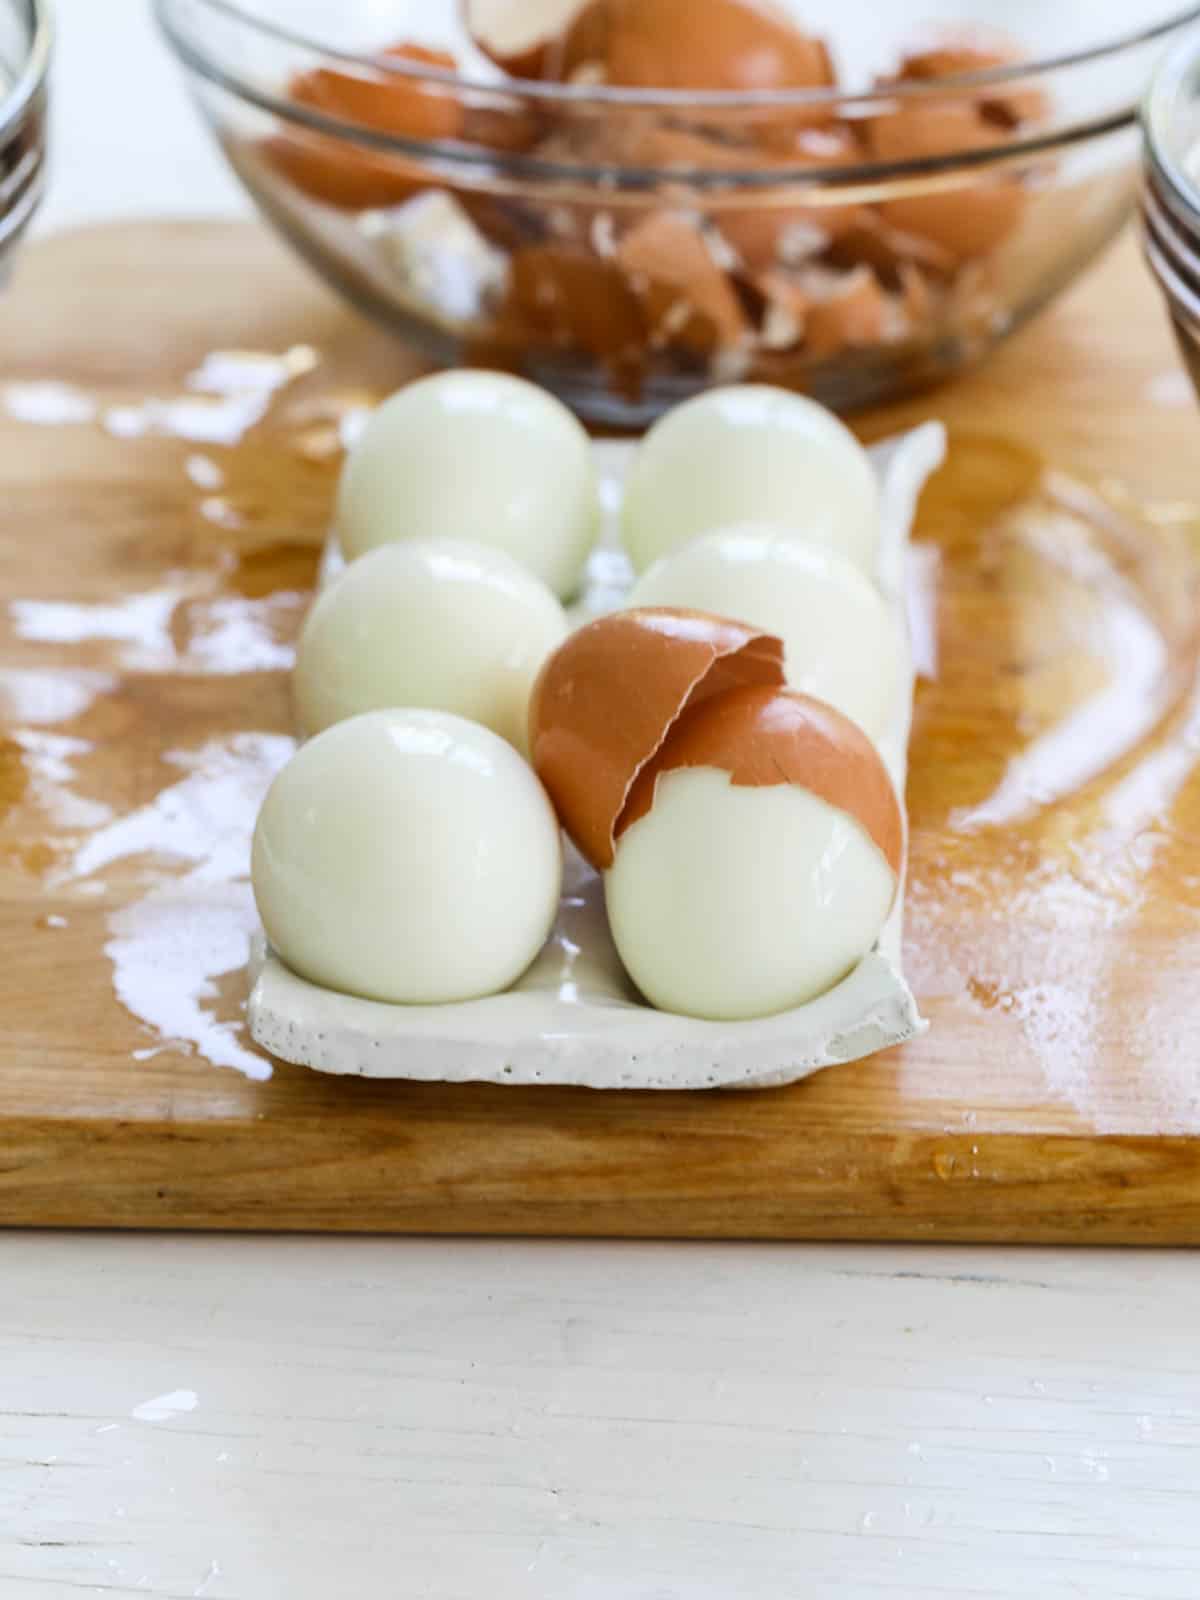 https://www.delicioustable.com/wp-content/uploads/2022/04/Steamed-hard-boiled-eggs-in-a-ceramic-tray.jpg